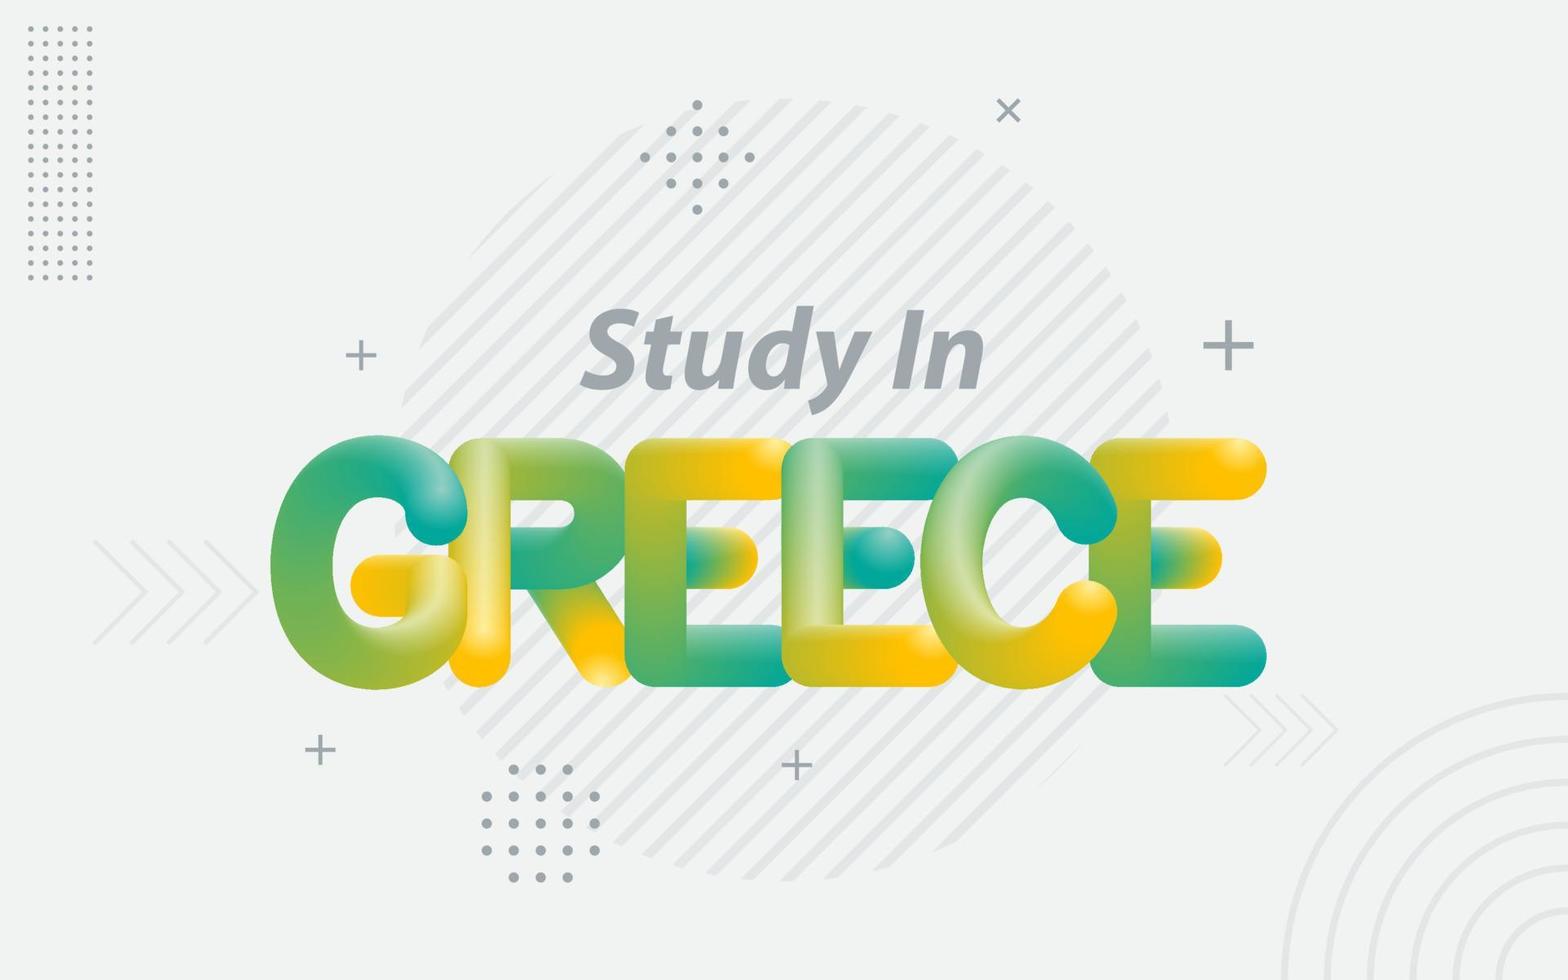 Study in Greece. Creative Typography with 3d Blend effect vector